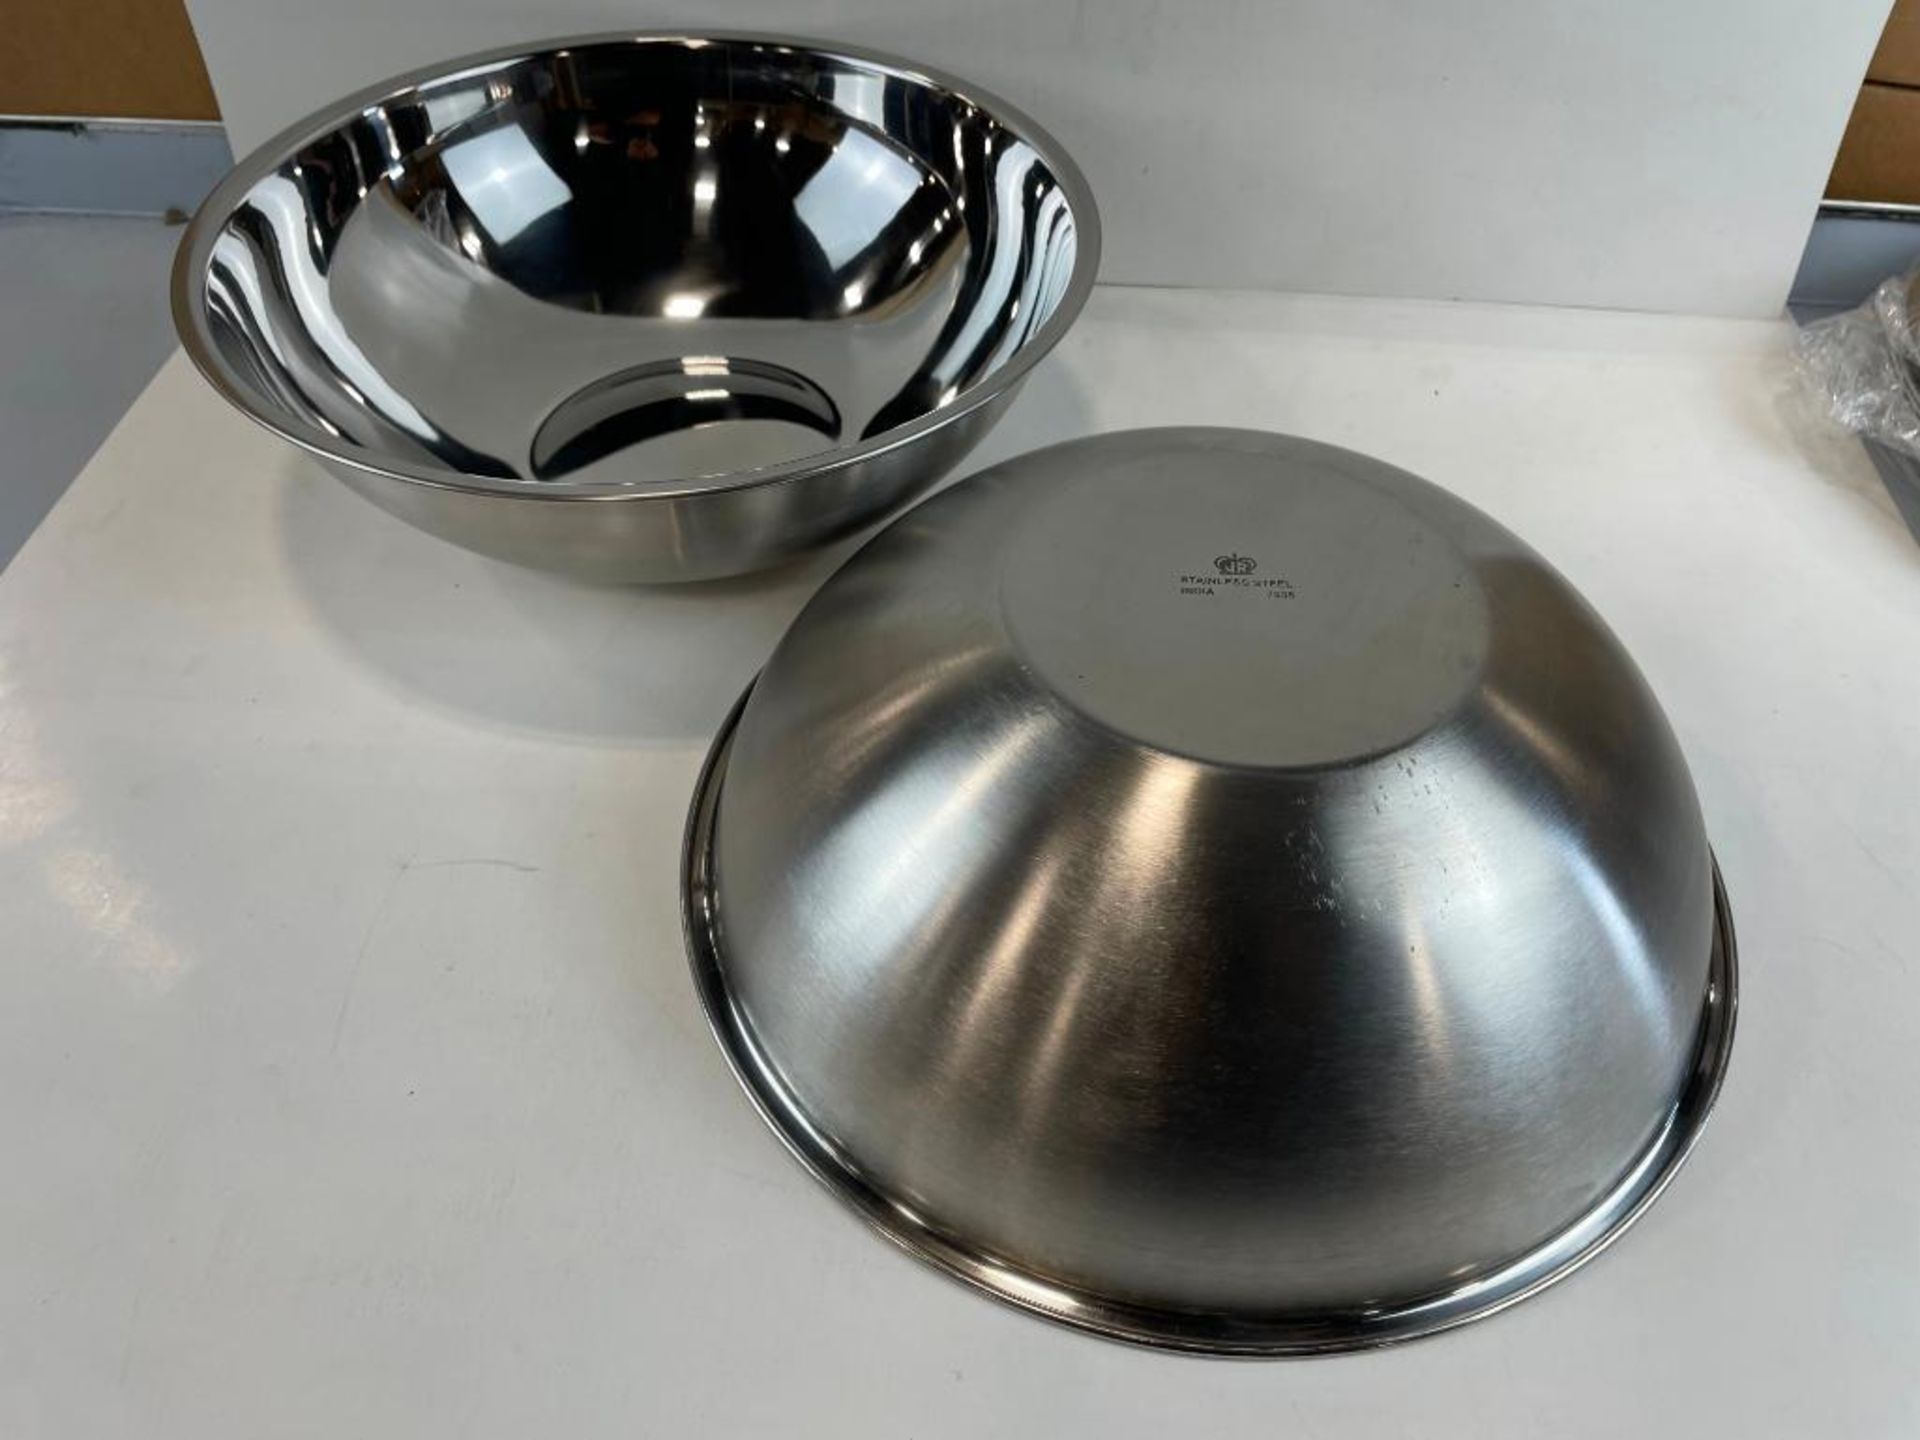 HEAVY DUTY STAINLESS STEEL MIXING BOWL 5 QT - LOT OF 2 - JOHNSON ROSE 7535 - Image 2 of 3